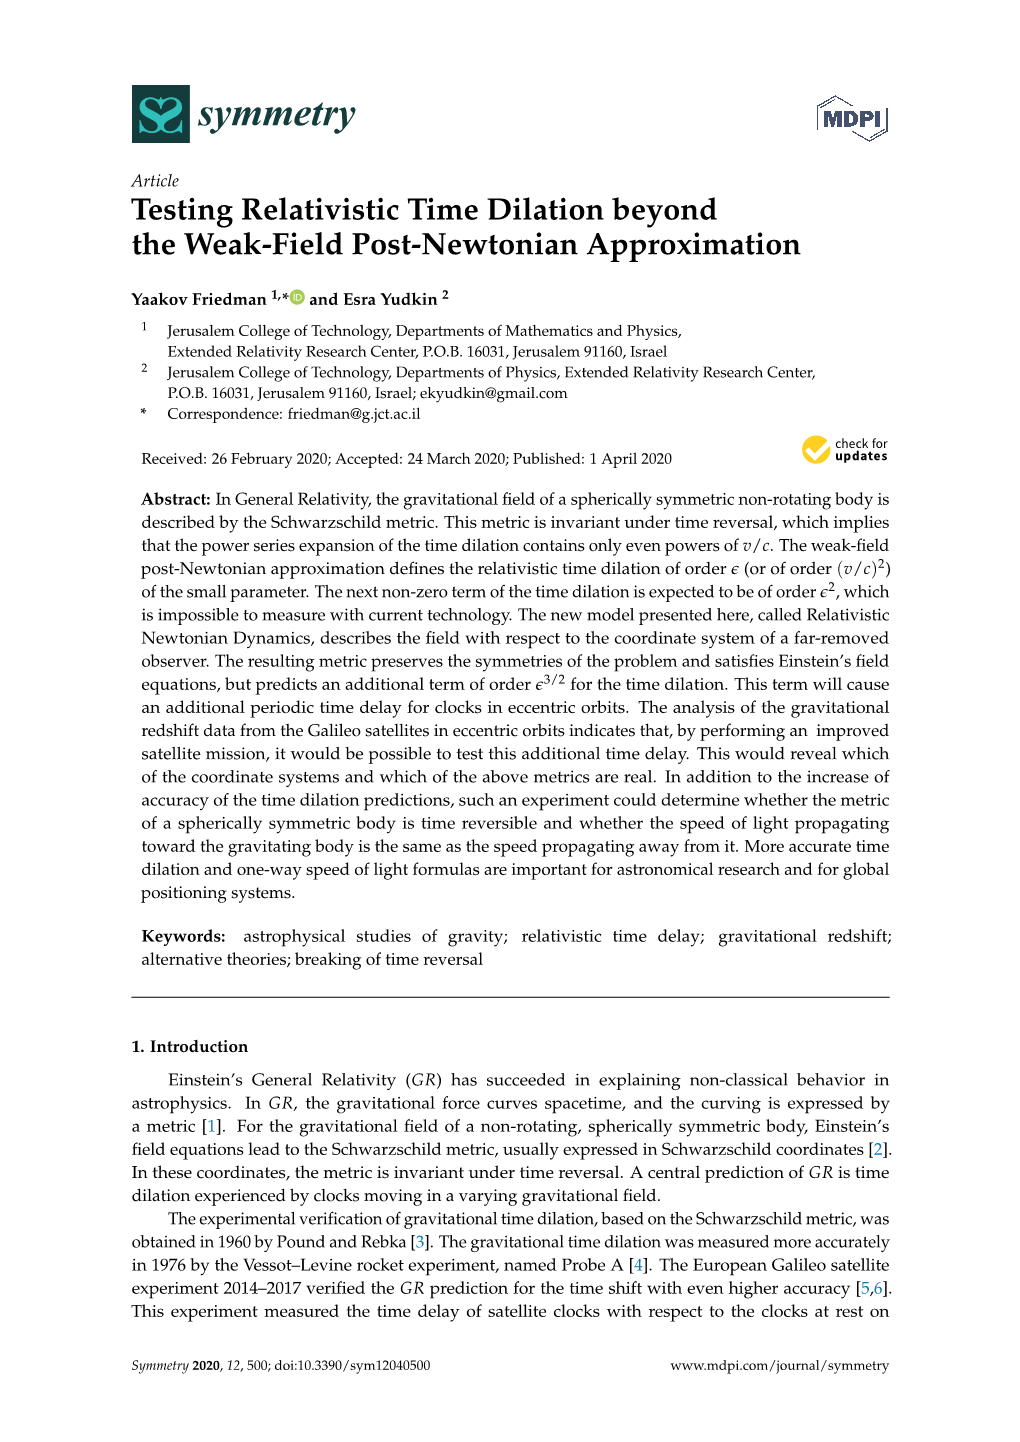 Testing Relativistic Time Dilation Beyond the Weak-Field Post-Newtonian Approximation